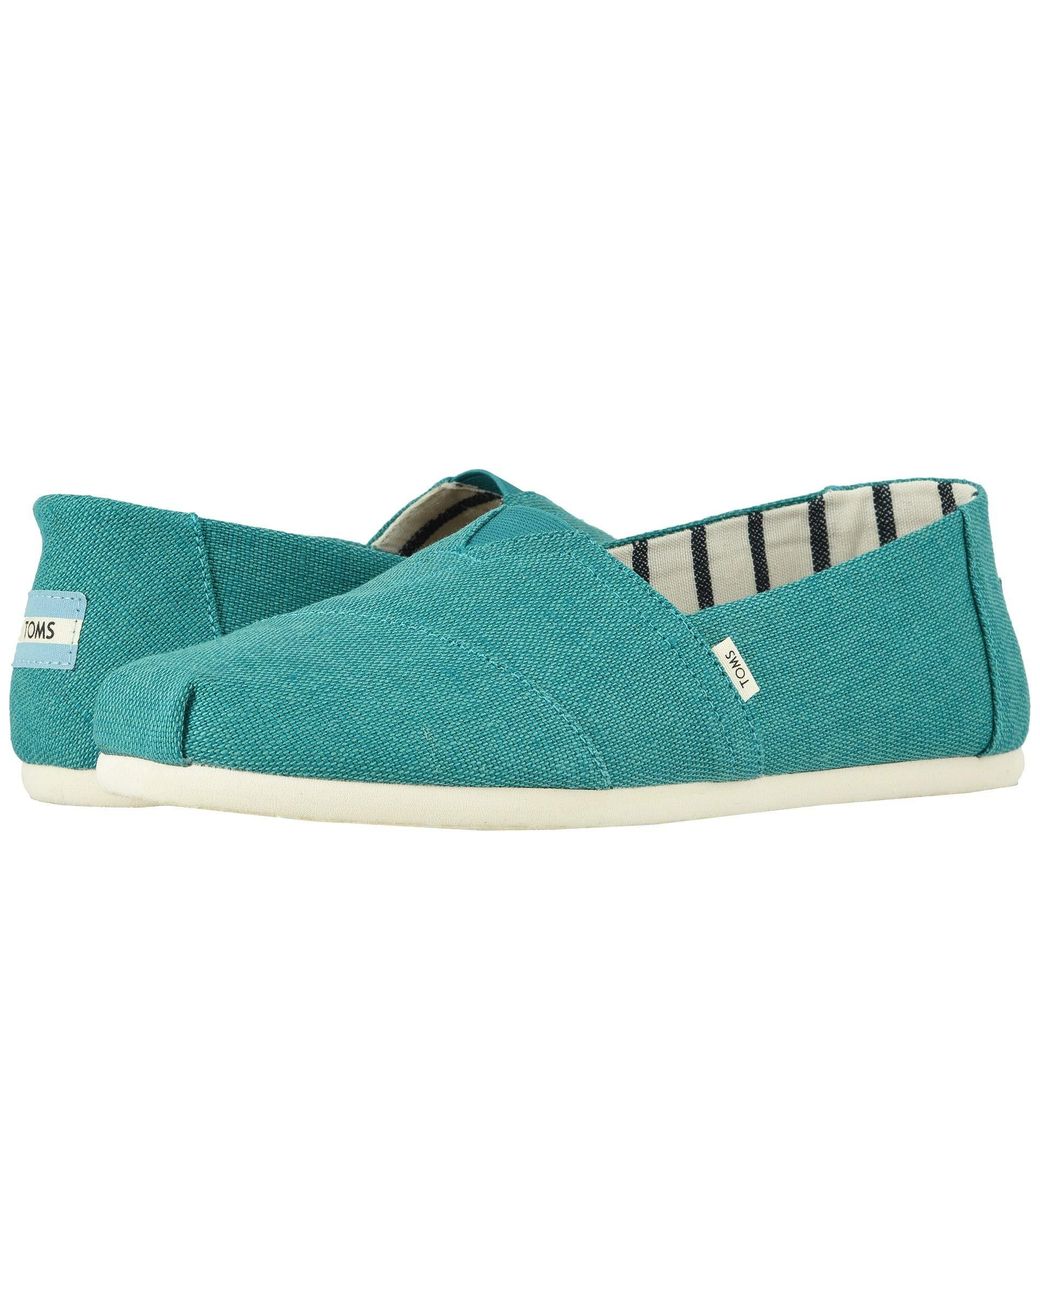 TOMS Canvas Venice Collection Alpargata in Green for Men - Lyst